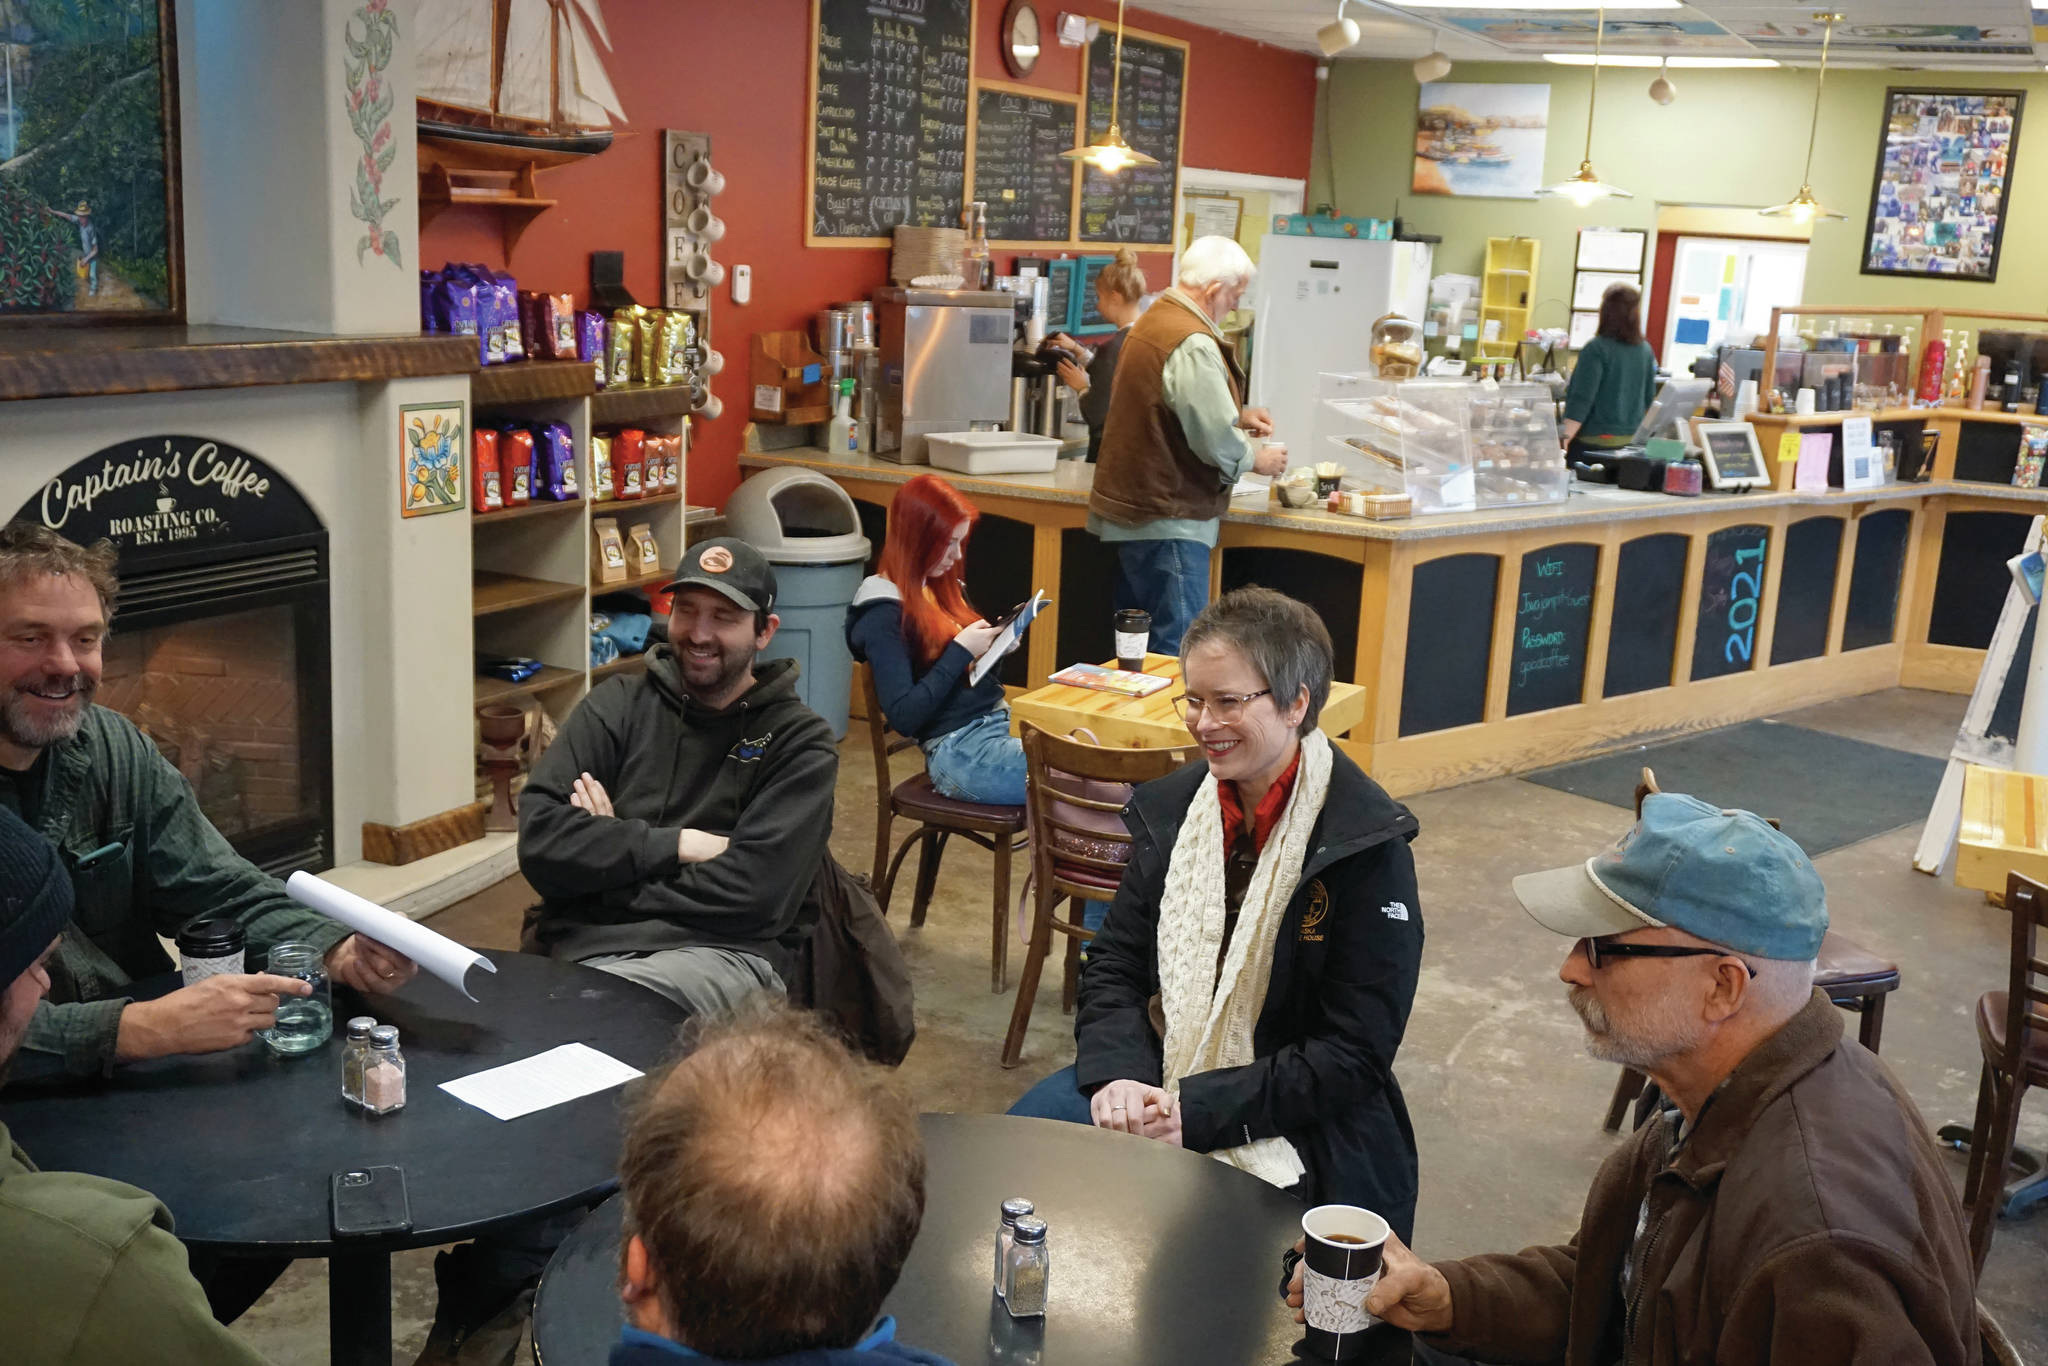 Rep. Sarah Vance, R-Homer, second from right, listens to a group of people before holding a town hall meeting on Monday, March 29, 2021, at Captain’s Coffee in Homer, Alaska. (Photo by Michael Armstrong/Homer News)